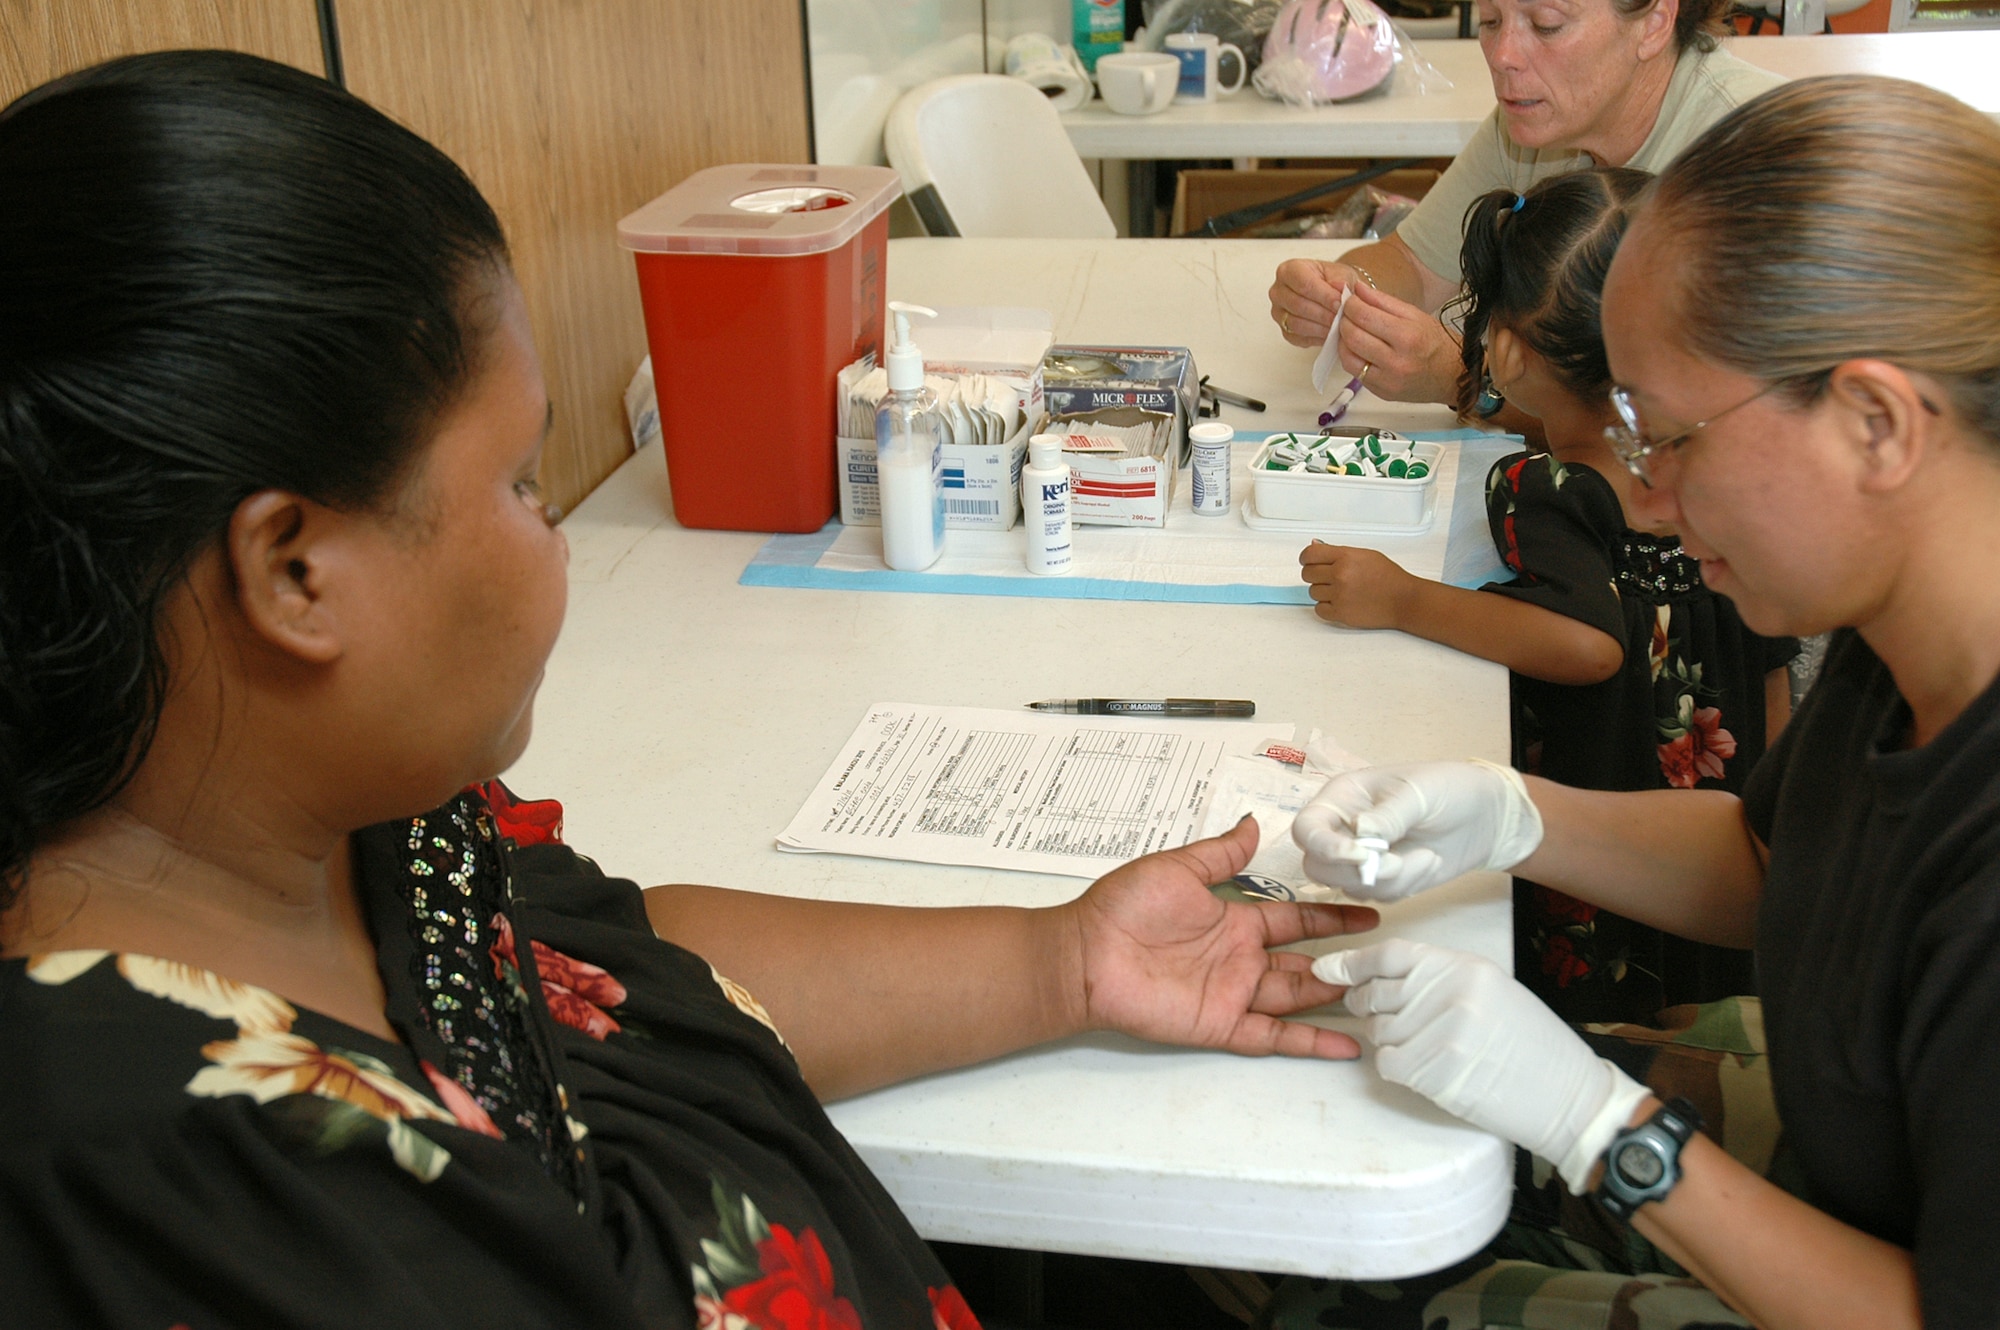 Capt. Elzadia Kainae, clinical nurse, 154th Medical Group administers glucose screening test during Hawaii Medical Innovative Readiness Training July 16, in Waianae, Hawaii. Innovative Readiness Training is designed to give Guard members an opportunity to complete mission essential training while acting as good neighbors addressing community and civic needs. The HI-MIRT took place July 12-17, on the Leeward Coast of Oahu. (U.S. Air Force photo/Tech. Sgt. Betty J. Squatrito-Martin)

